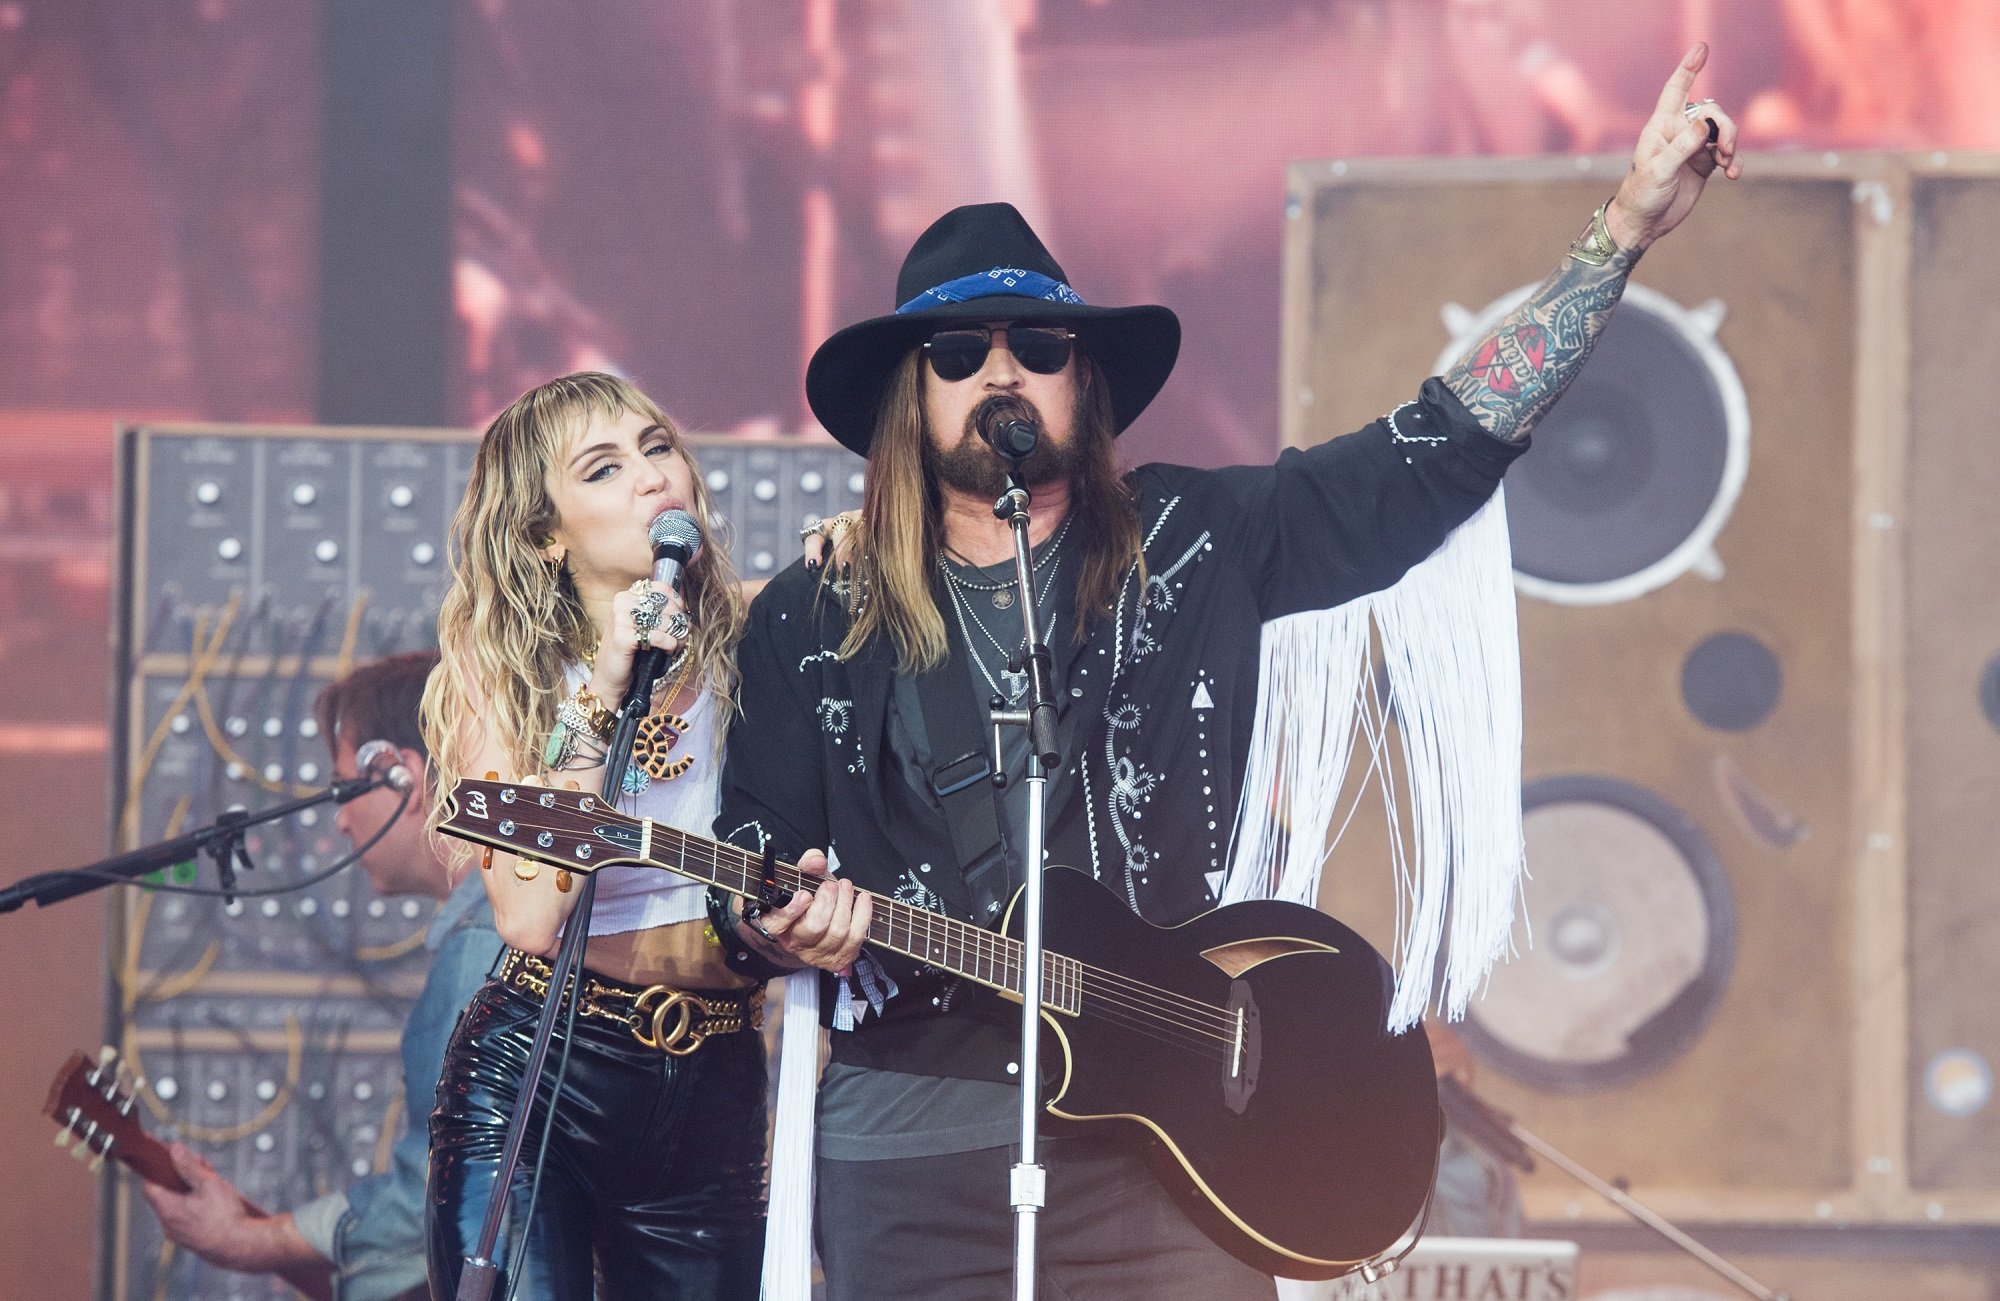 Miley Cyrus and Billy Ray Cyrus perform during Glastonbury Festival on June 30, 2019